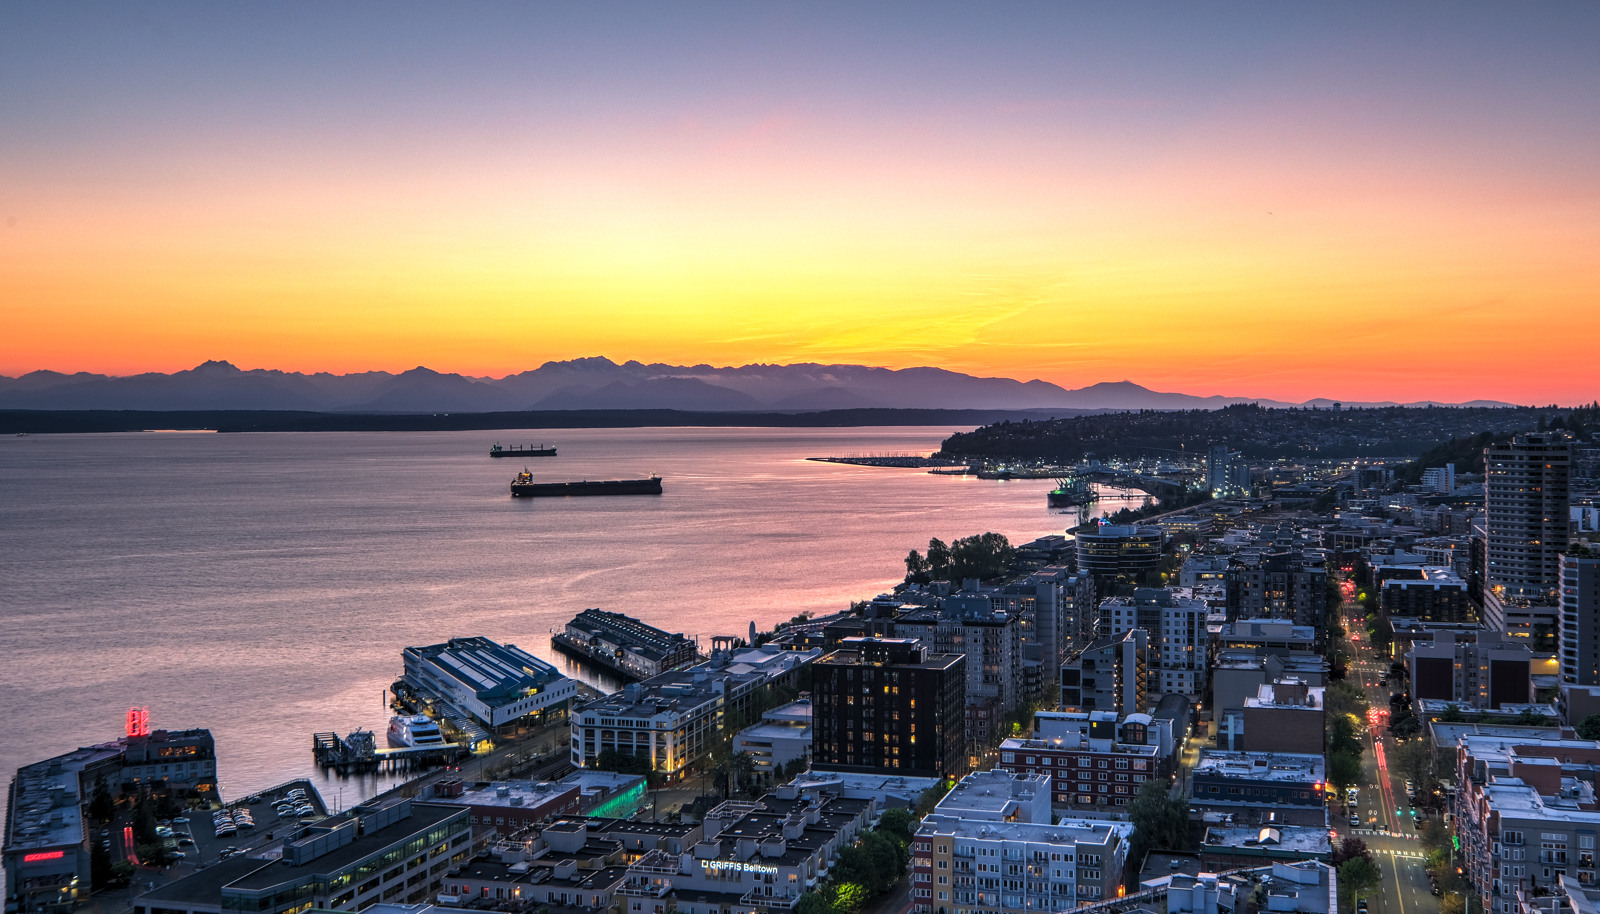 The penthouse offers sweeping unobstructed views of Puget Sound and the Olympic Mountains.